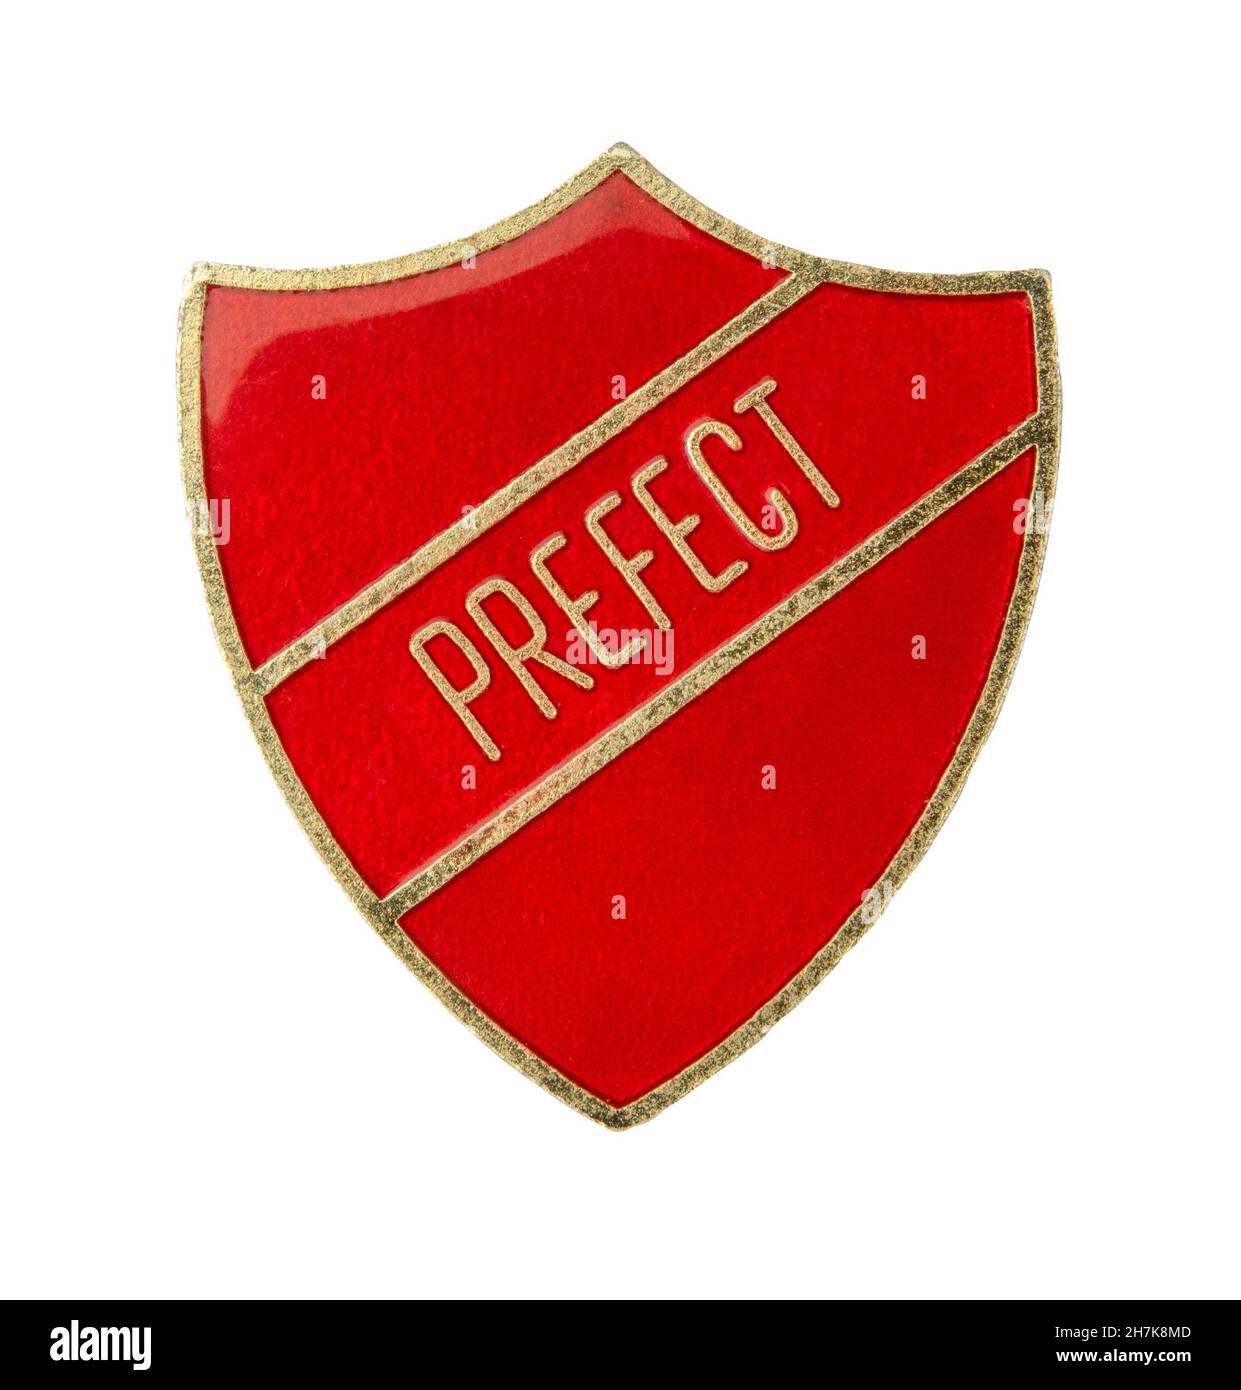 An Isolated Shield Shaped Prefect Badge From A British School On A White Background Stock Photo